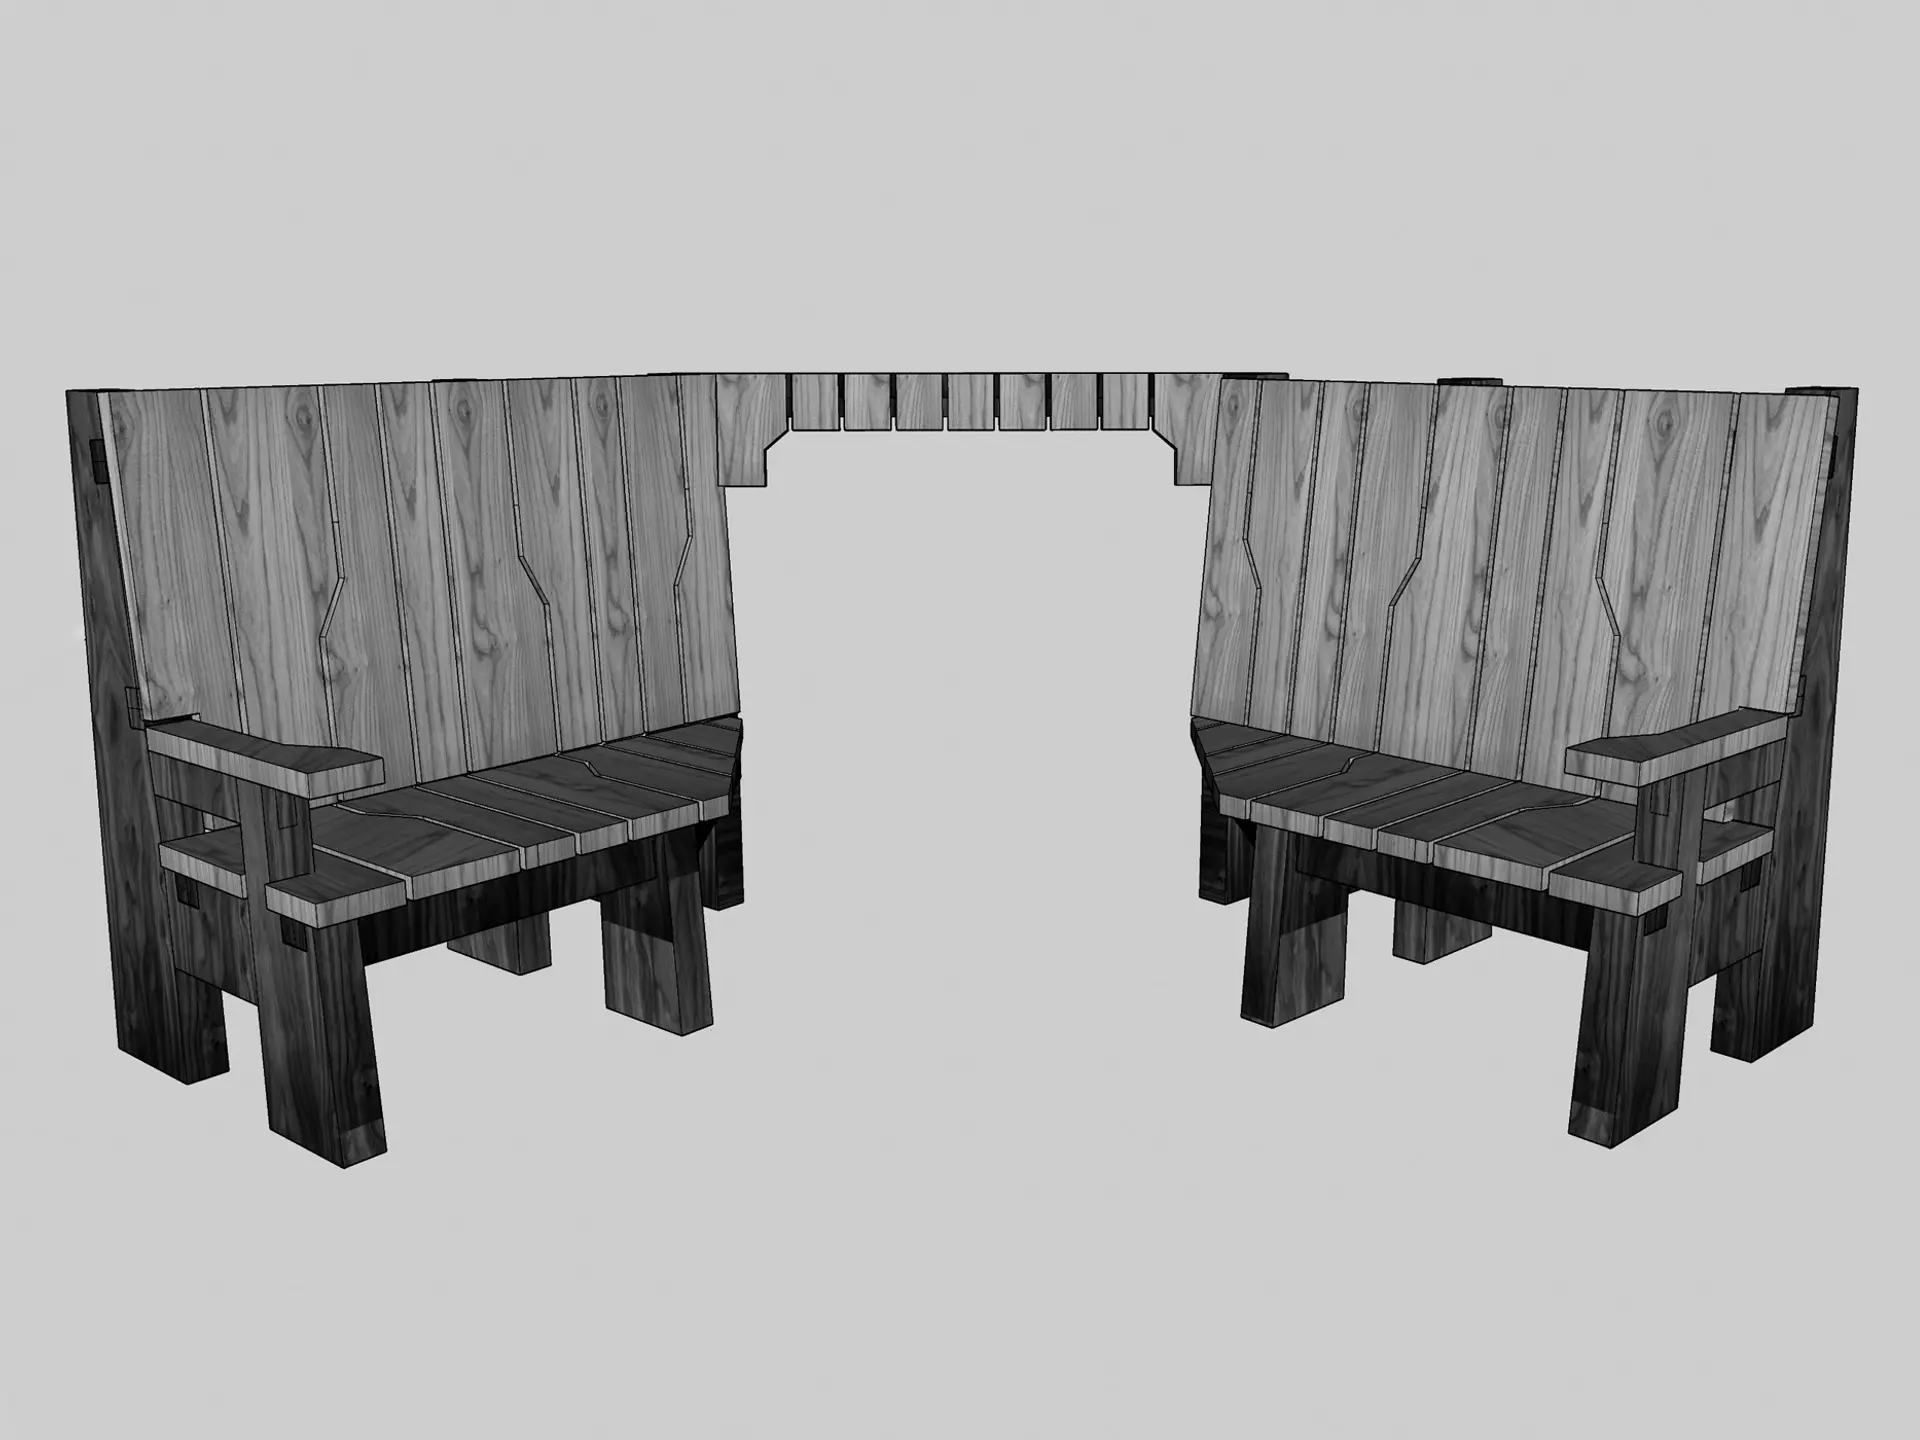 A greyscale image of the final Angus Remembers bench design, heavy wood, 4 legs at one end and 4 legs at the other end, a bridge-like section between the 2 bench sections. The bridge is only at the top of the bench, there is a large space below it. 